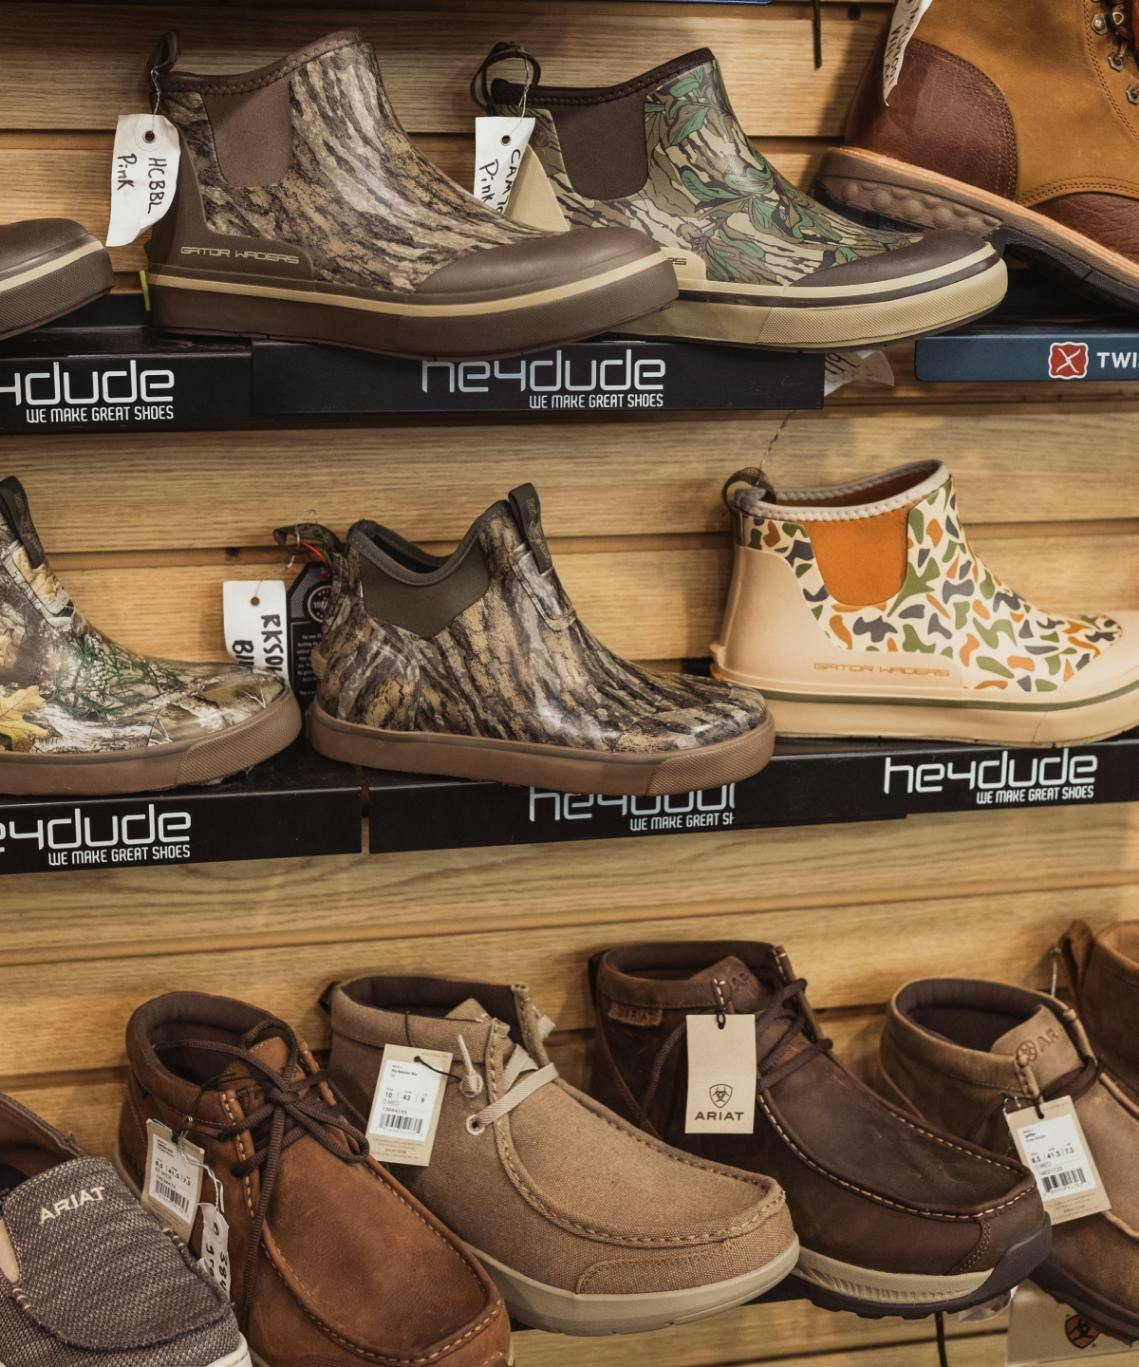 multiple pairs of camoflauge patterned, heydude brand, boat shoes. there are also leather ariat shoes on the shelf below | anderson's general store